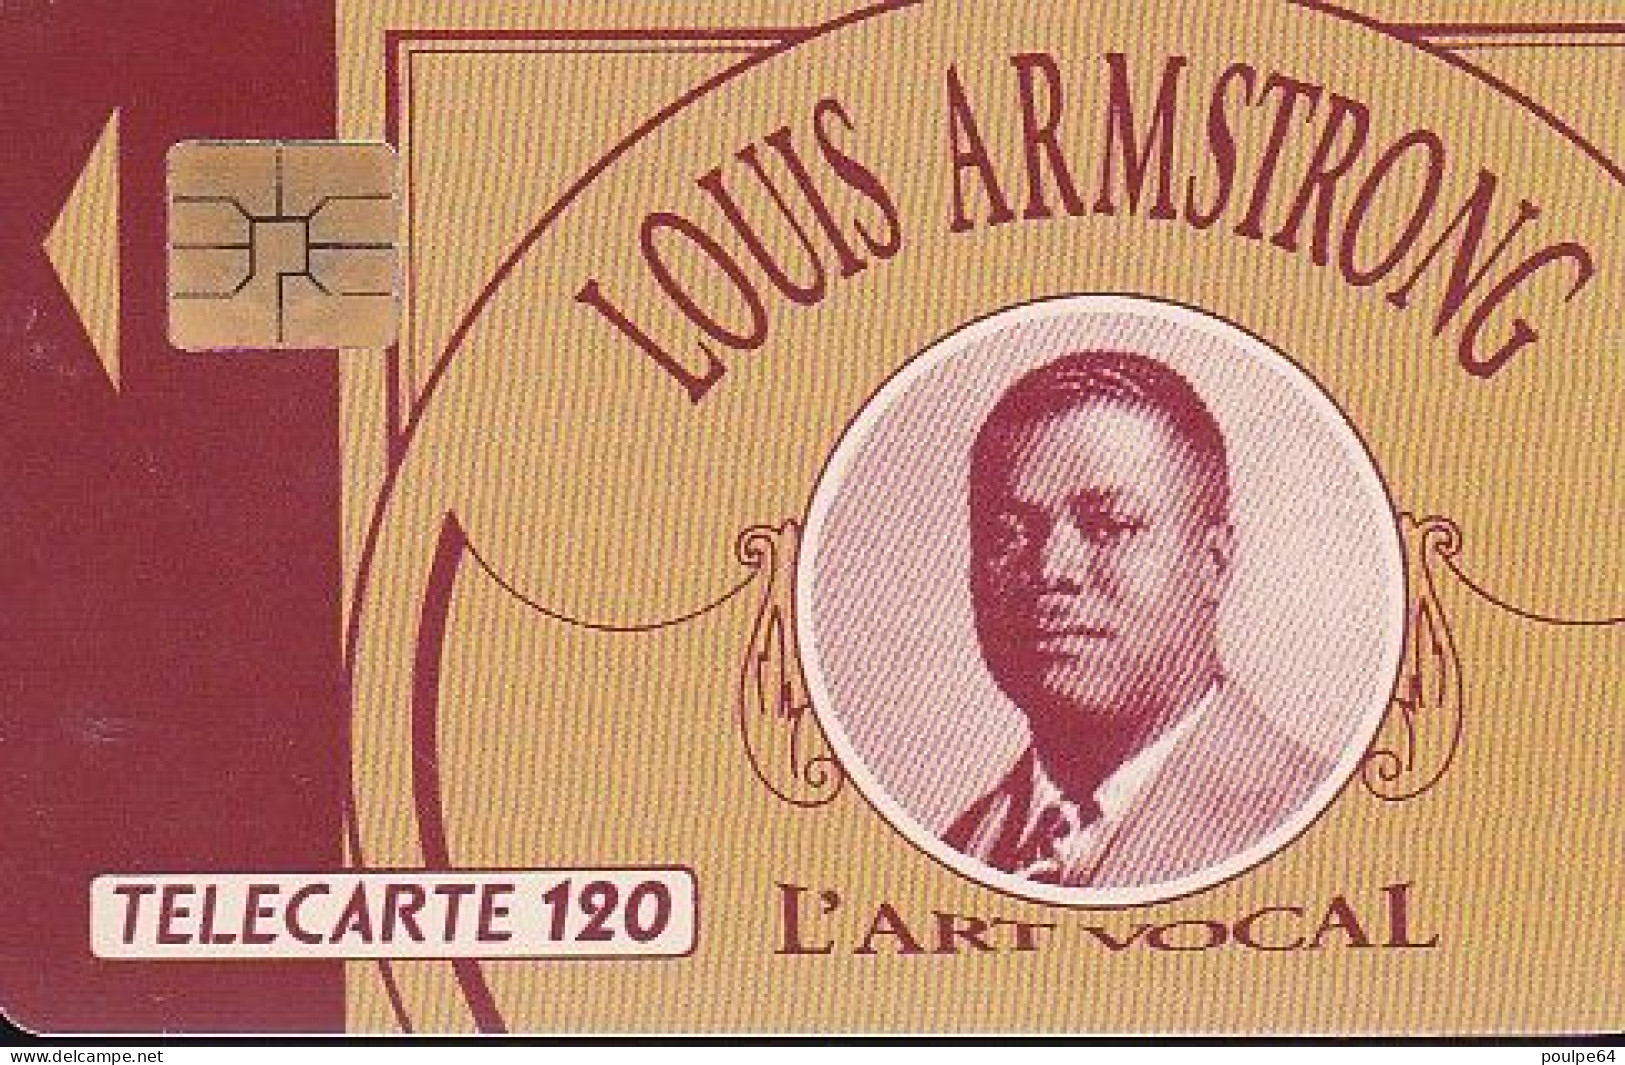 F230 - 10/1991 - LOUIS AMSTRONG - 120 SO3 - 1991